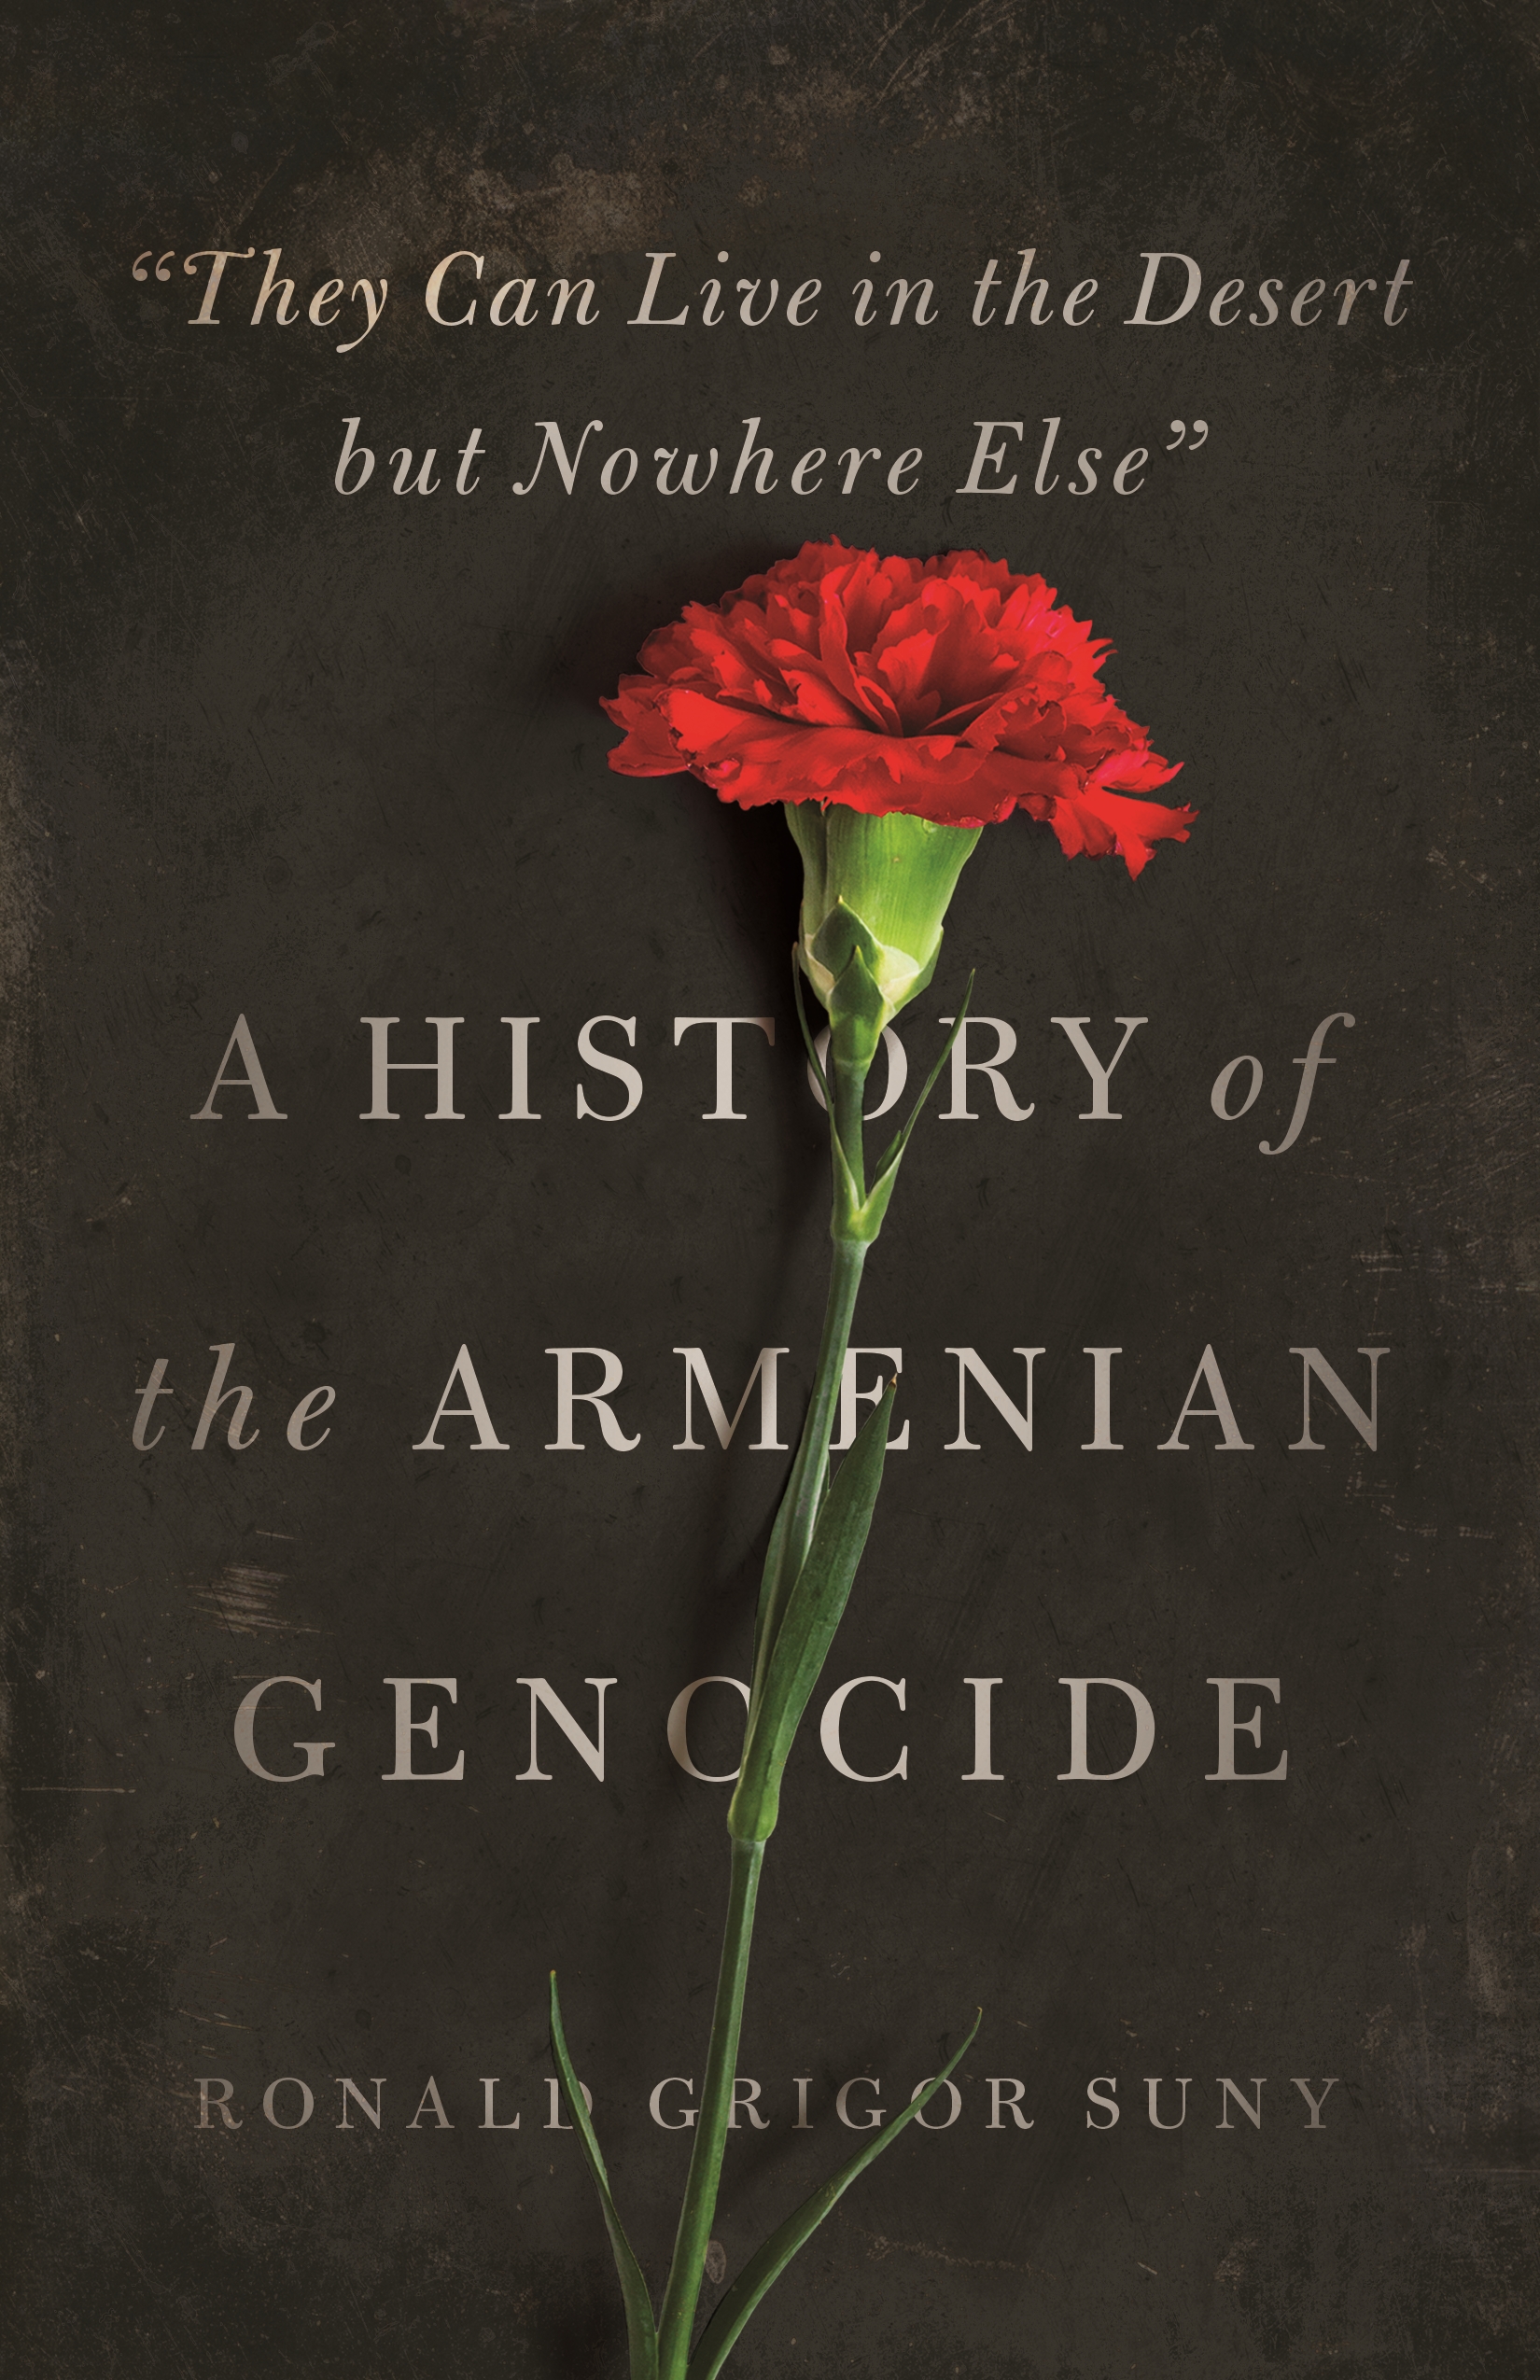 Armenian was one of the first languages into which the Bible was translated  - 100 Years, 100 Facts about Armenia to commemorate the centennial of the  Armenian Genocide100 Years, 100 Facts about